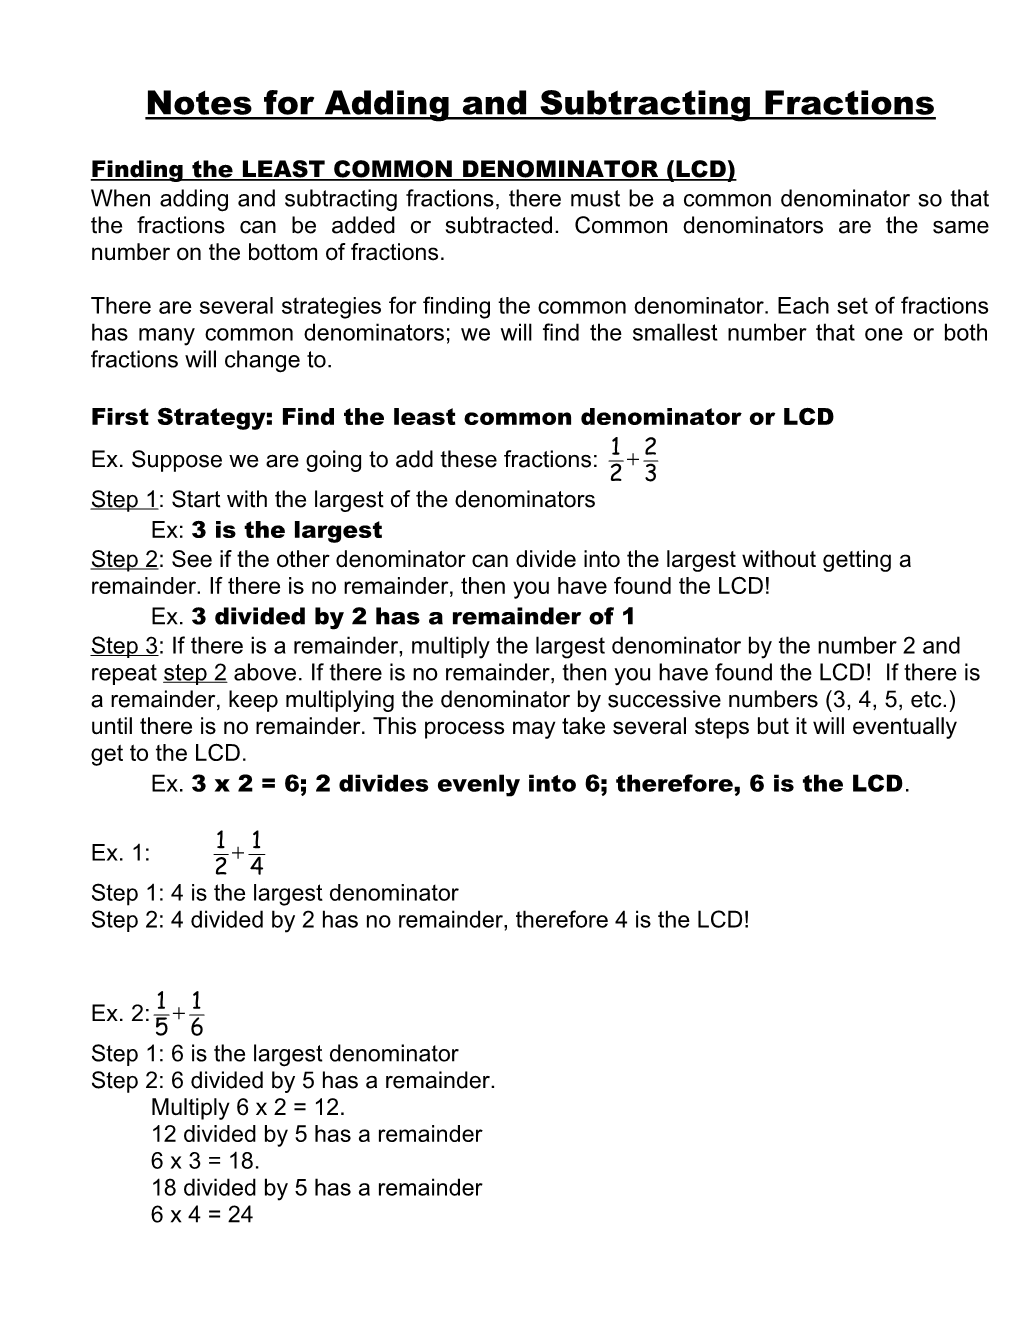 Addition And Subtraction Of Fractions Worksheets